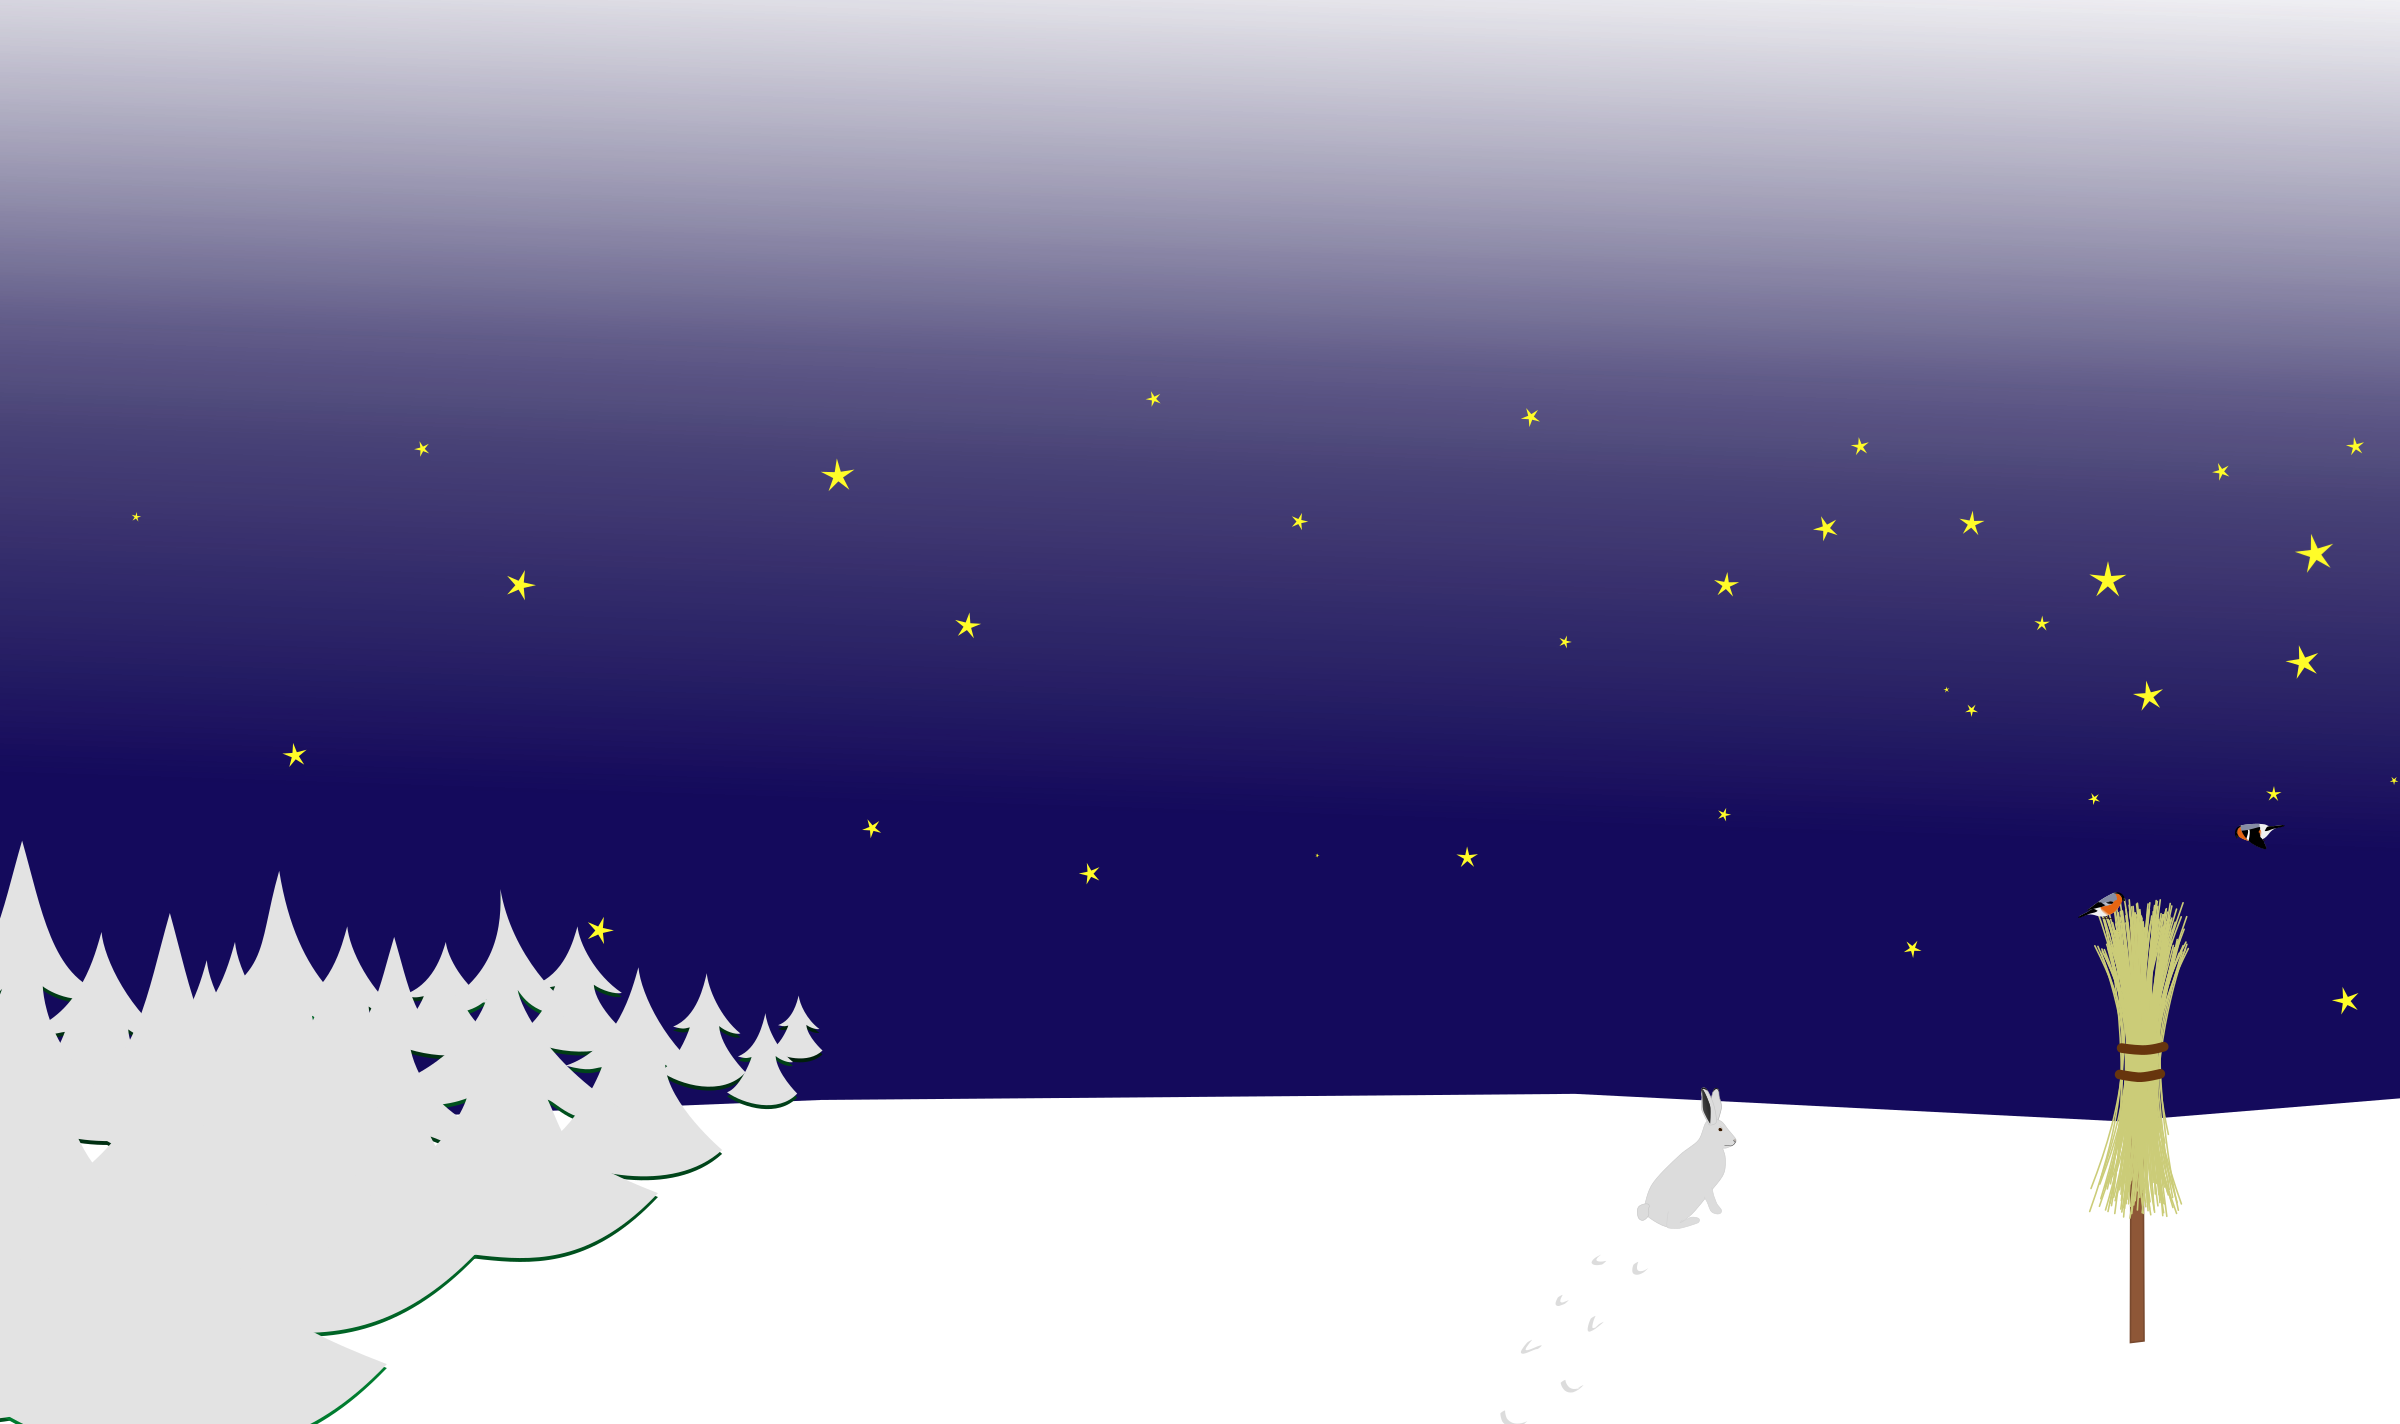 Winter clipart scenery. Night scene icons png